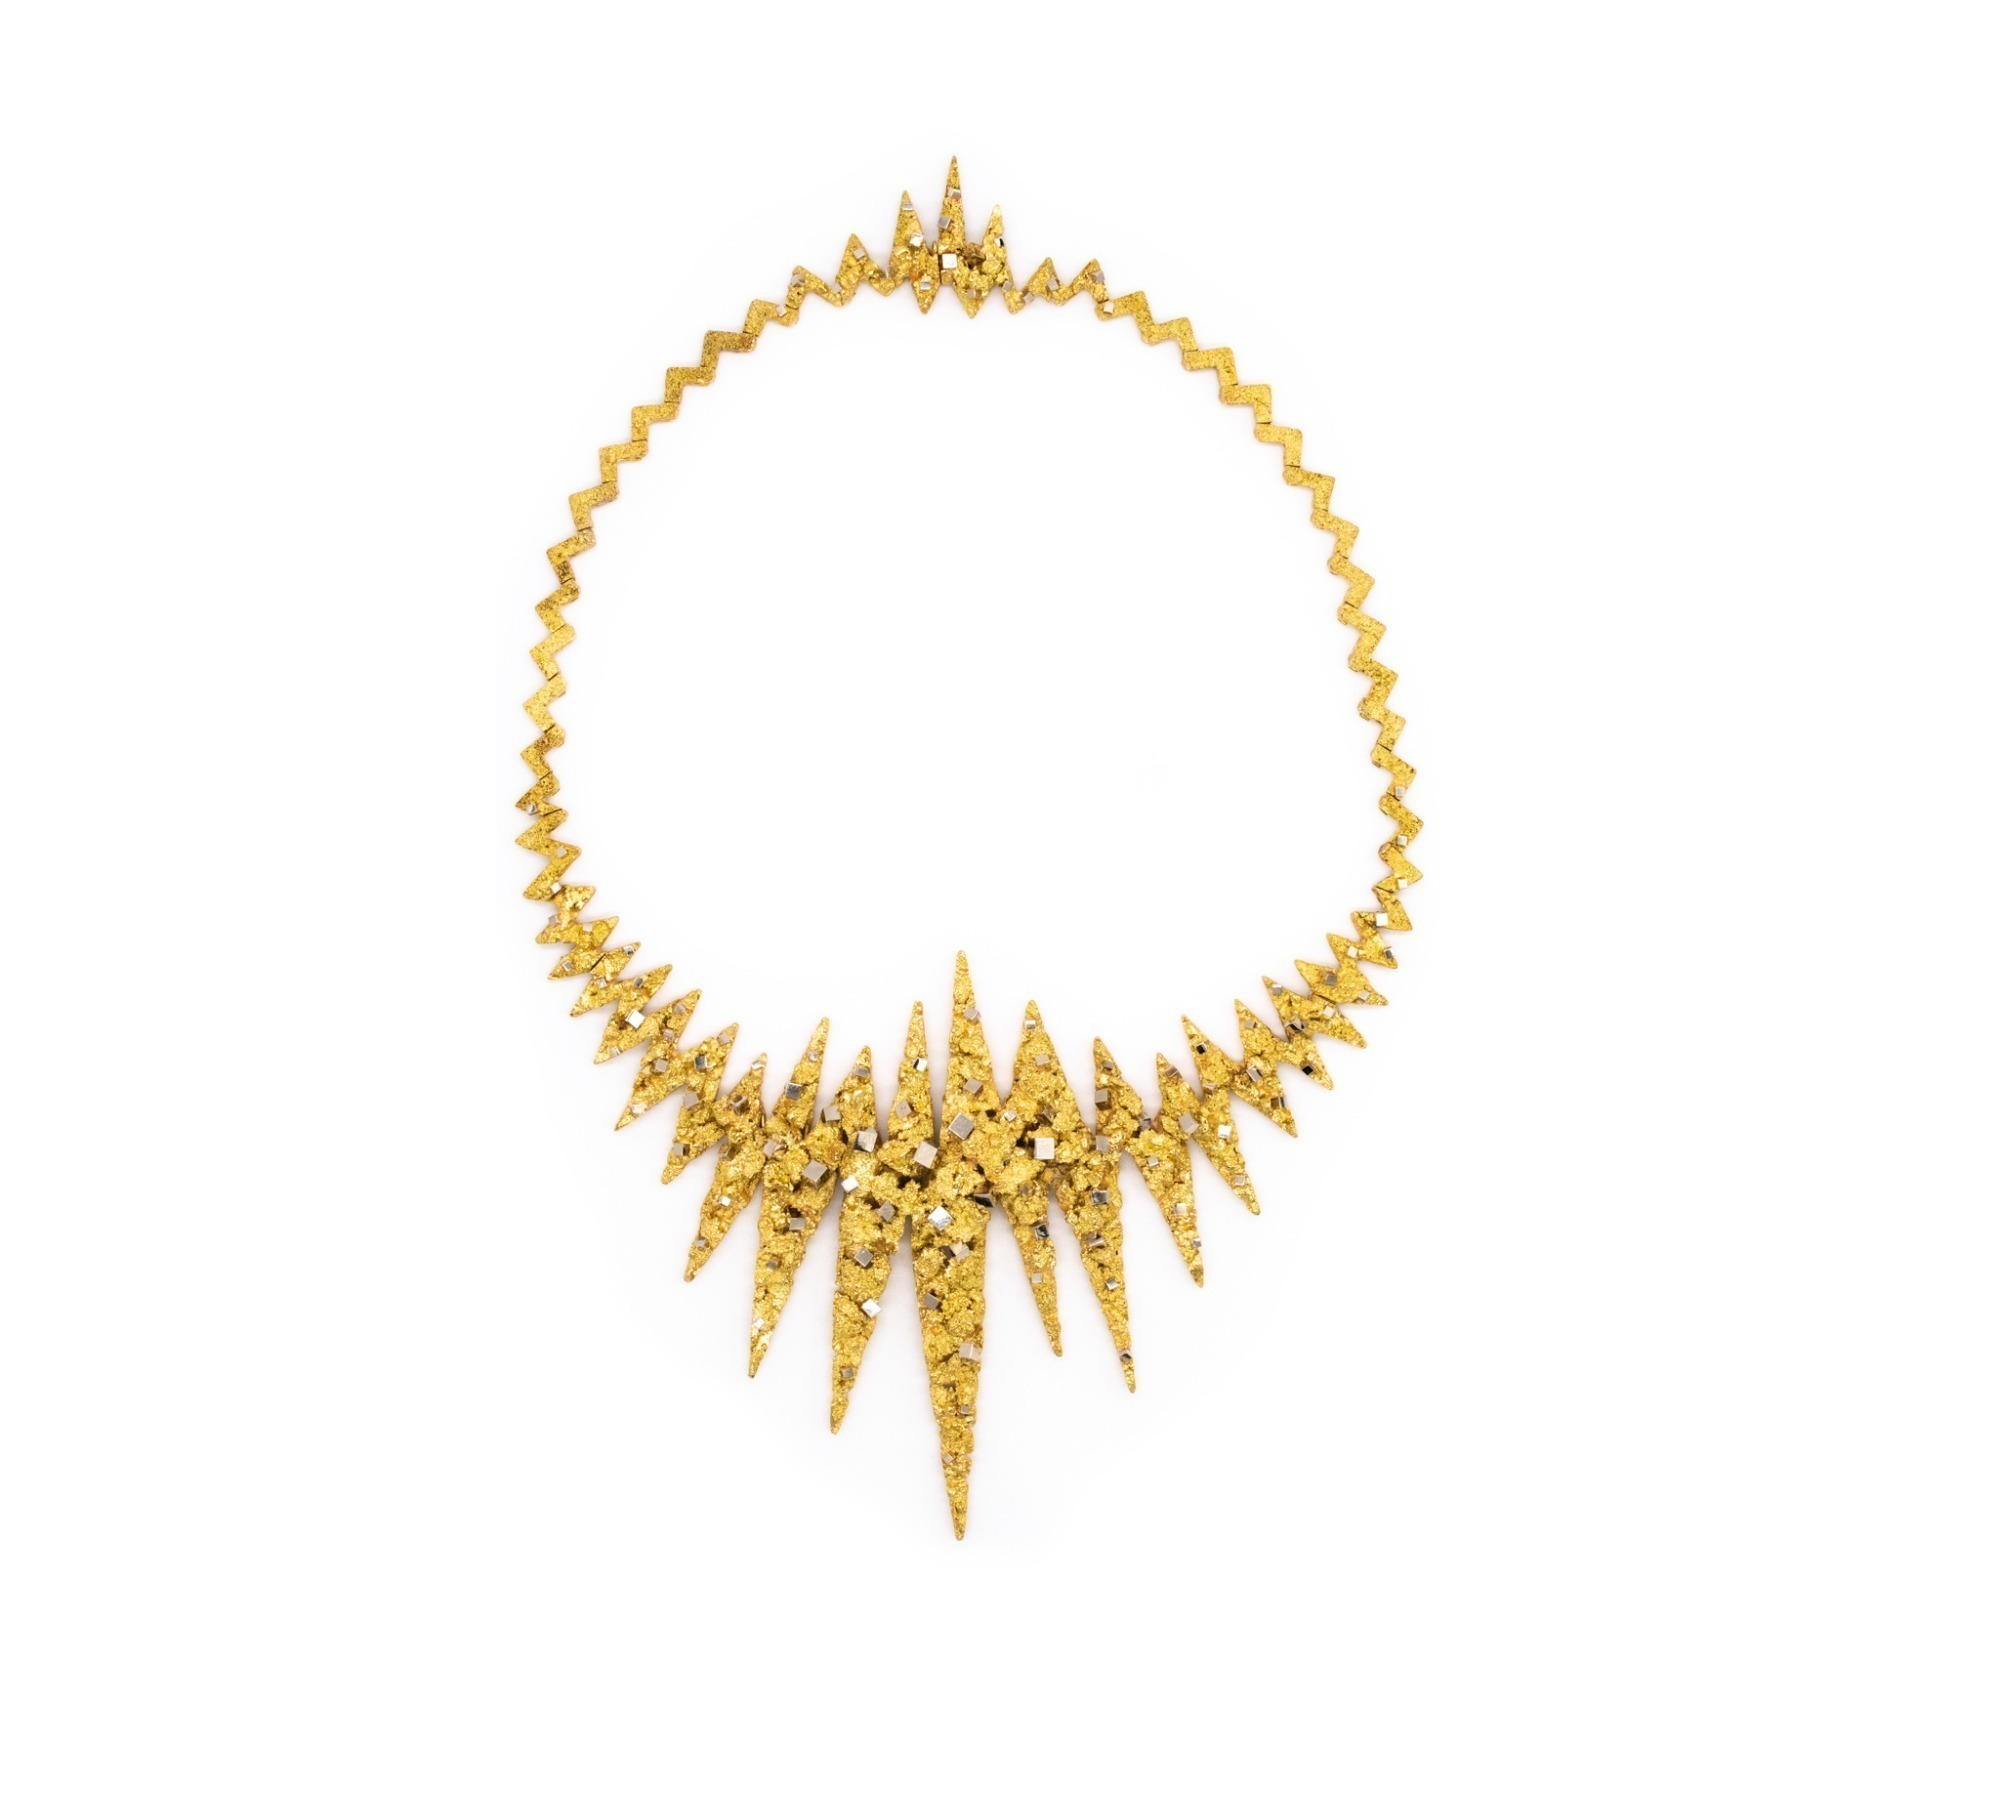 GAY FRERES 18K GOLD RETRO STARDUST EXPLOSION BRUTALIST NECKLACE, CIRCA 1950